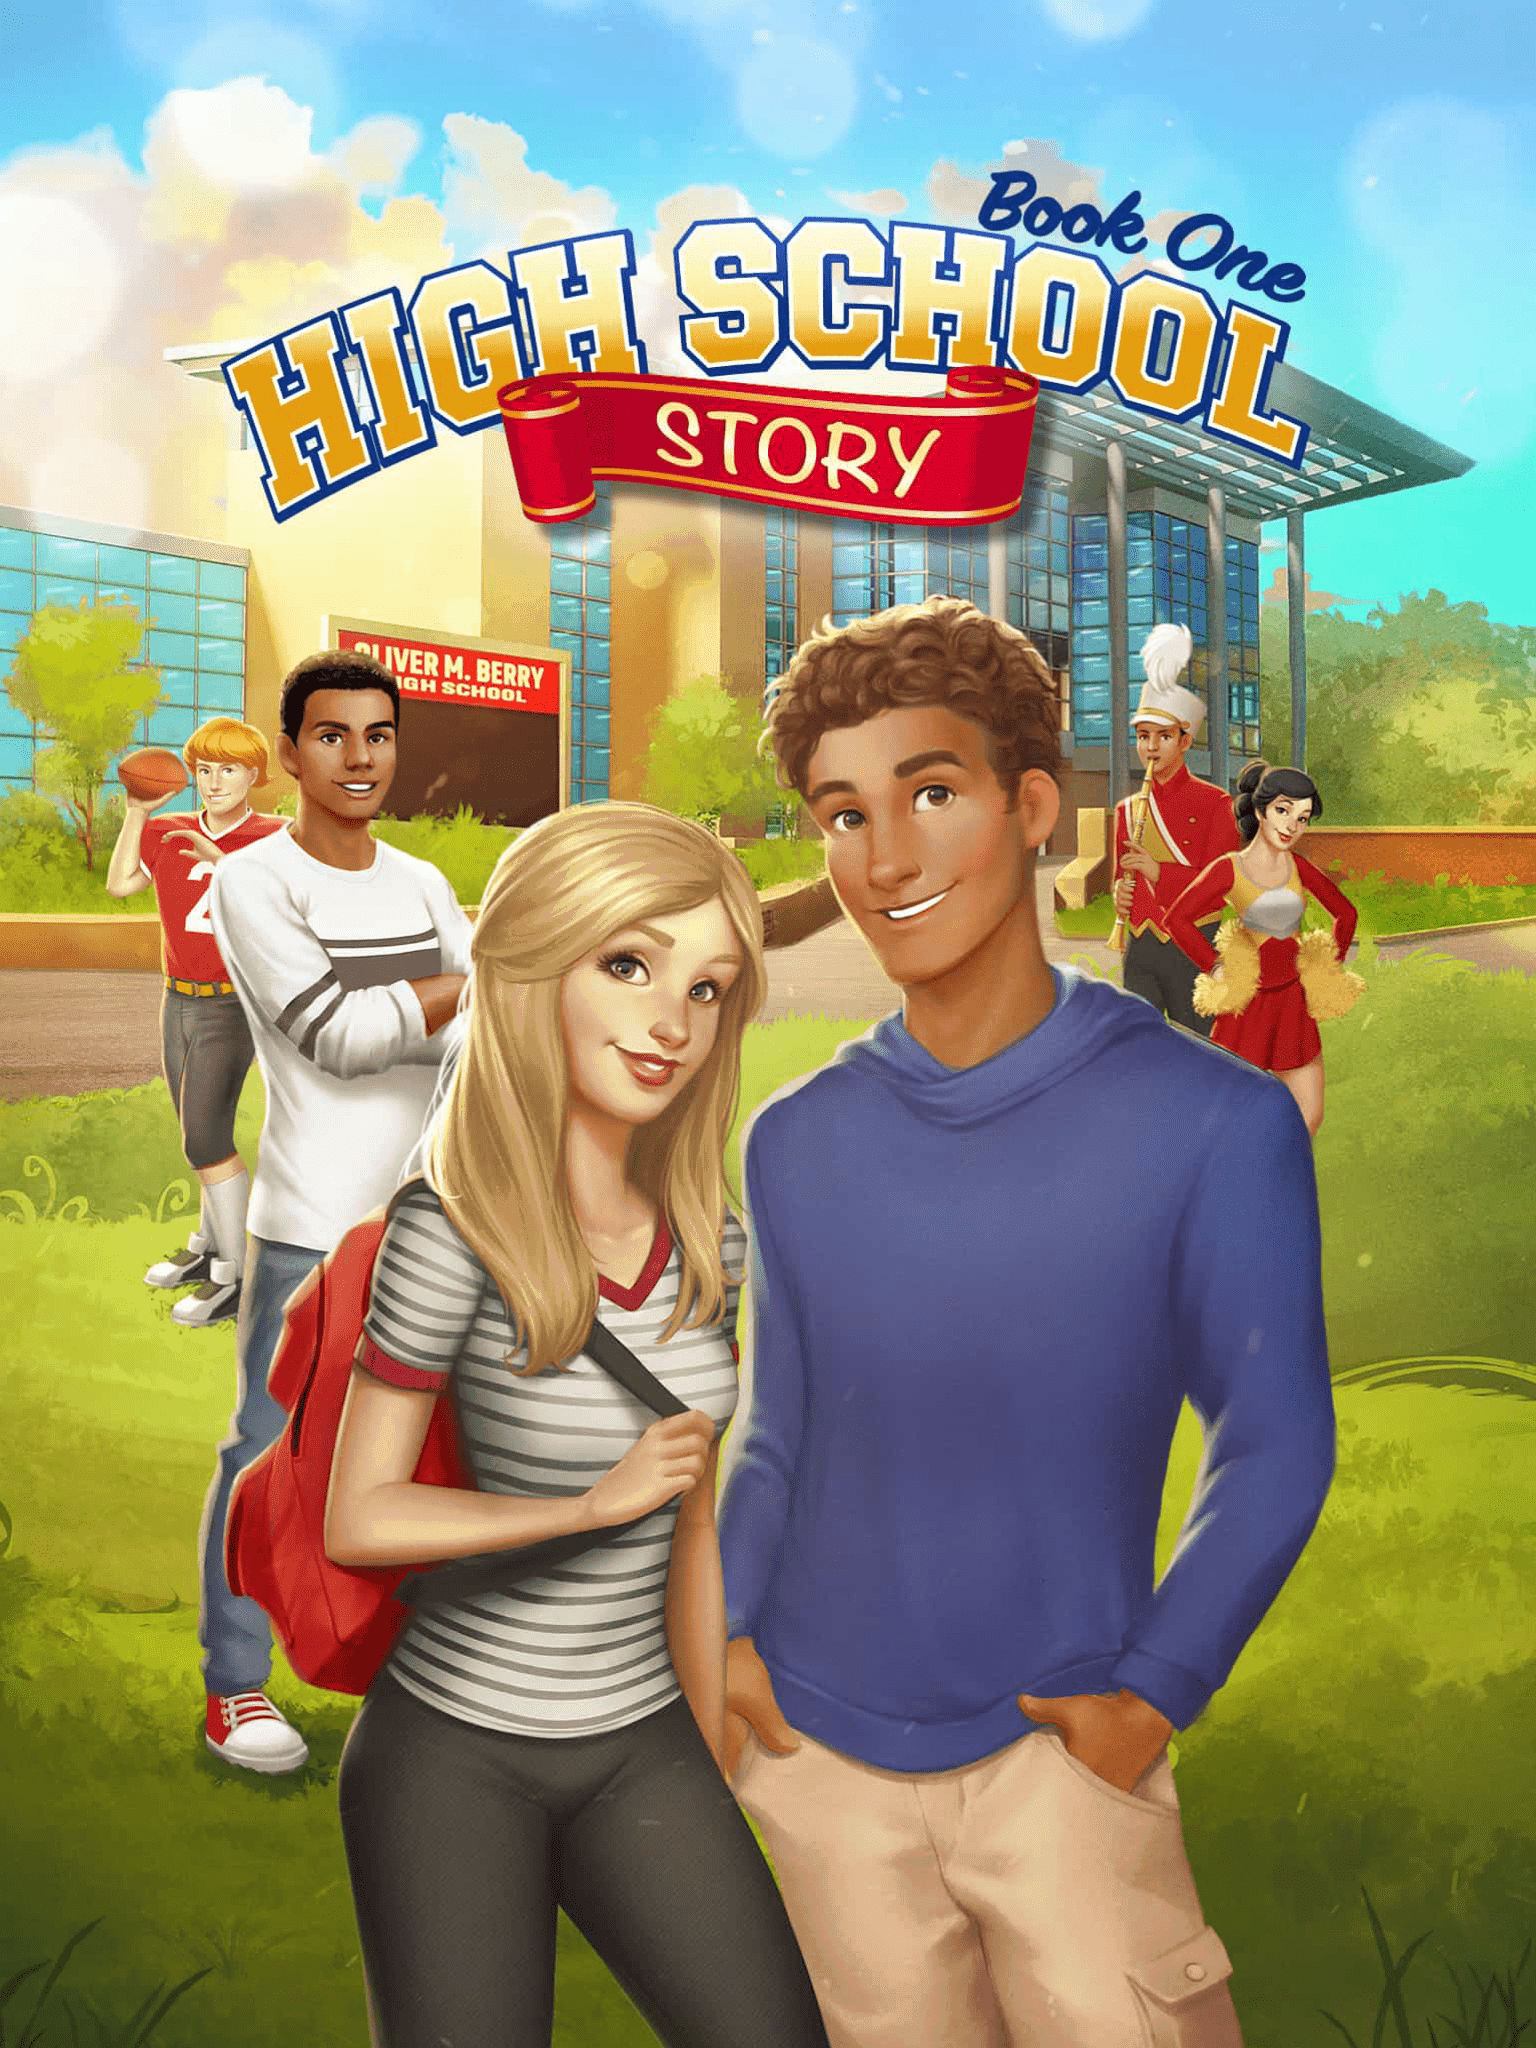 high-school-story-book-1-choices-stories-you-play-wikia-fandom-powered-by-wikia